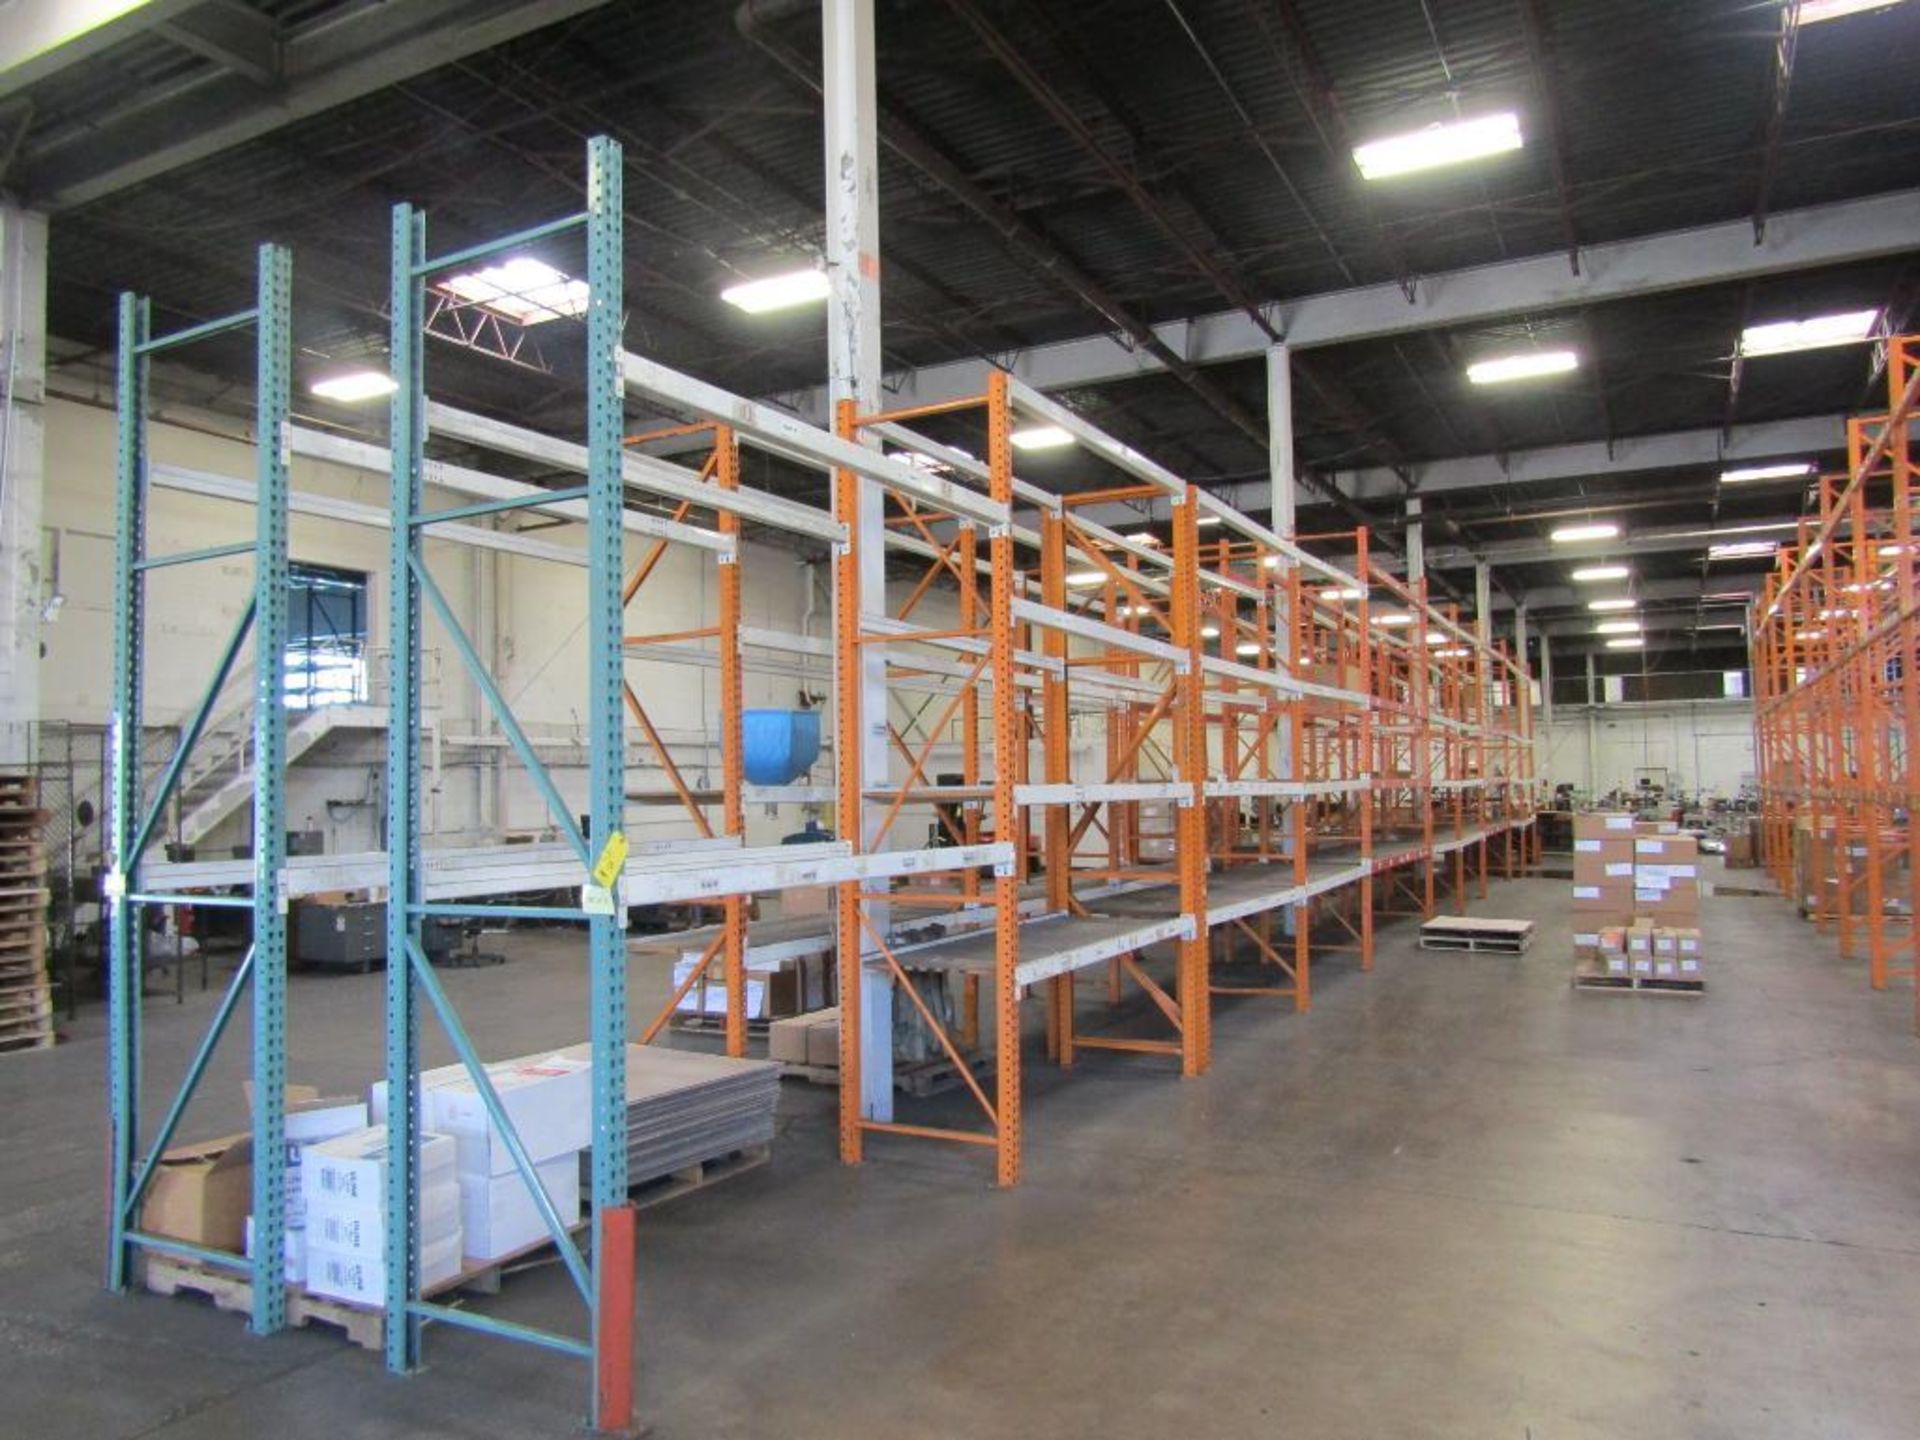 LOT: (10) Pallet Rack Sections - (4) 14ft. x 8ft. X 36in., (2) 14ft. x 12ft. x 36in., (4) 12ft. x - Image 2 of 2